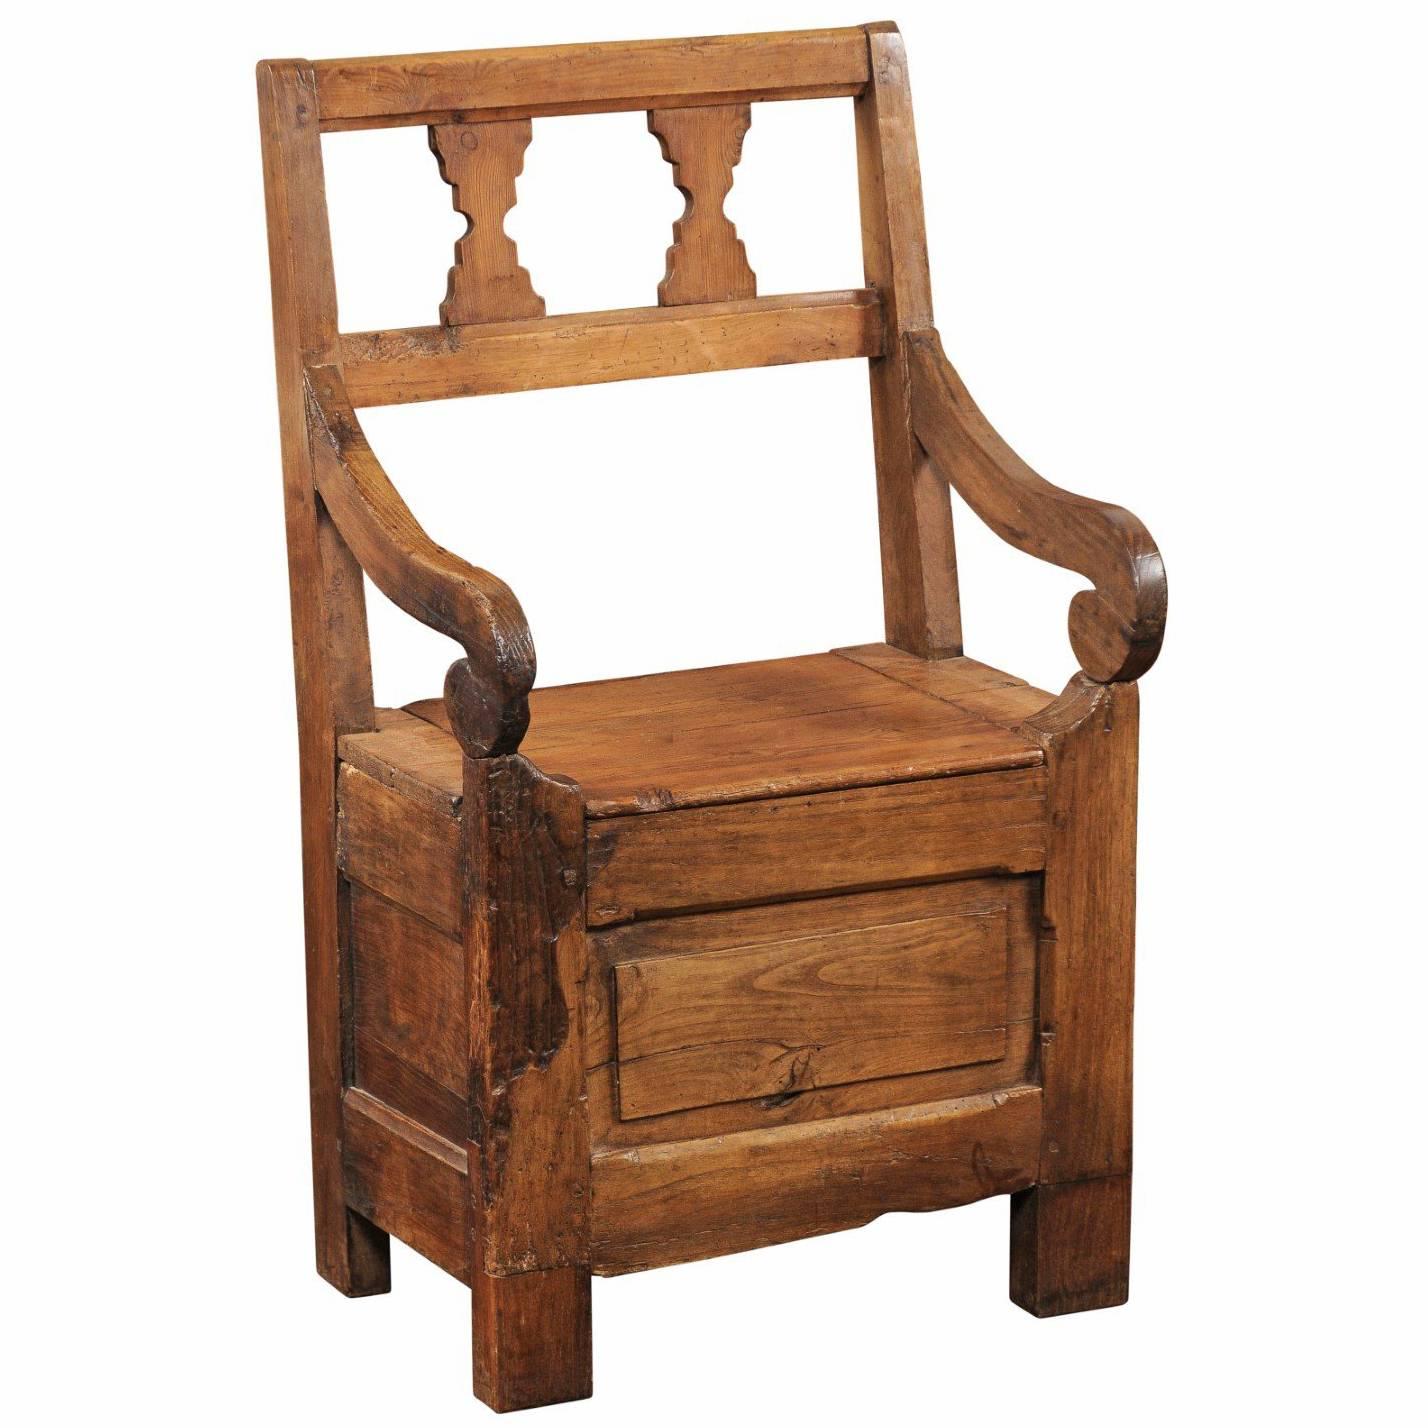 English Country Pine Chair circa 1800 with Scrolled Arms and Lift-Top Seat For Sale